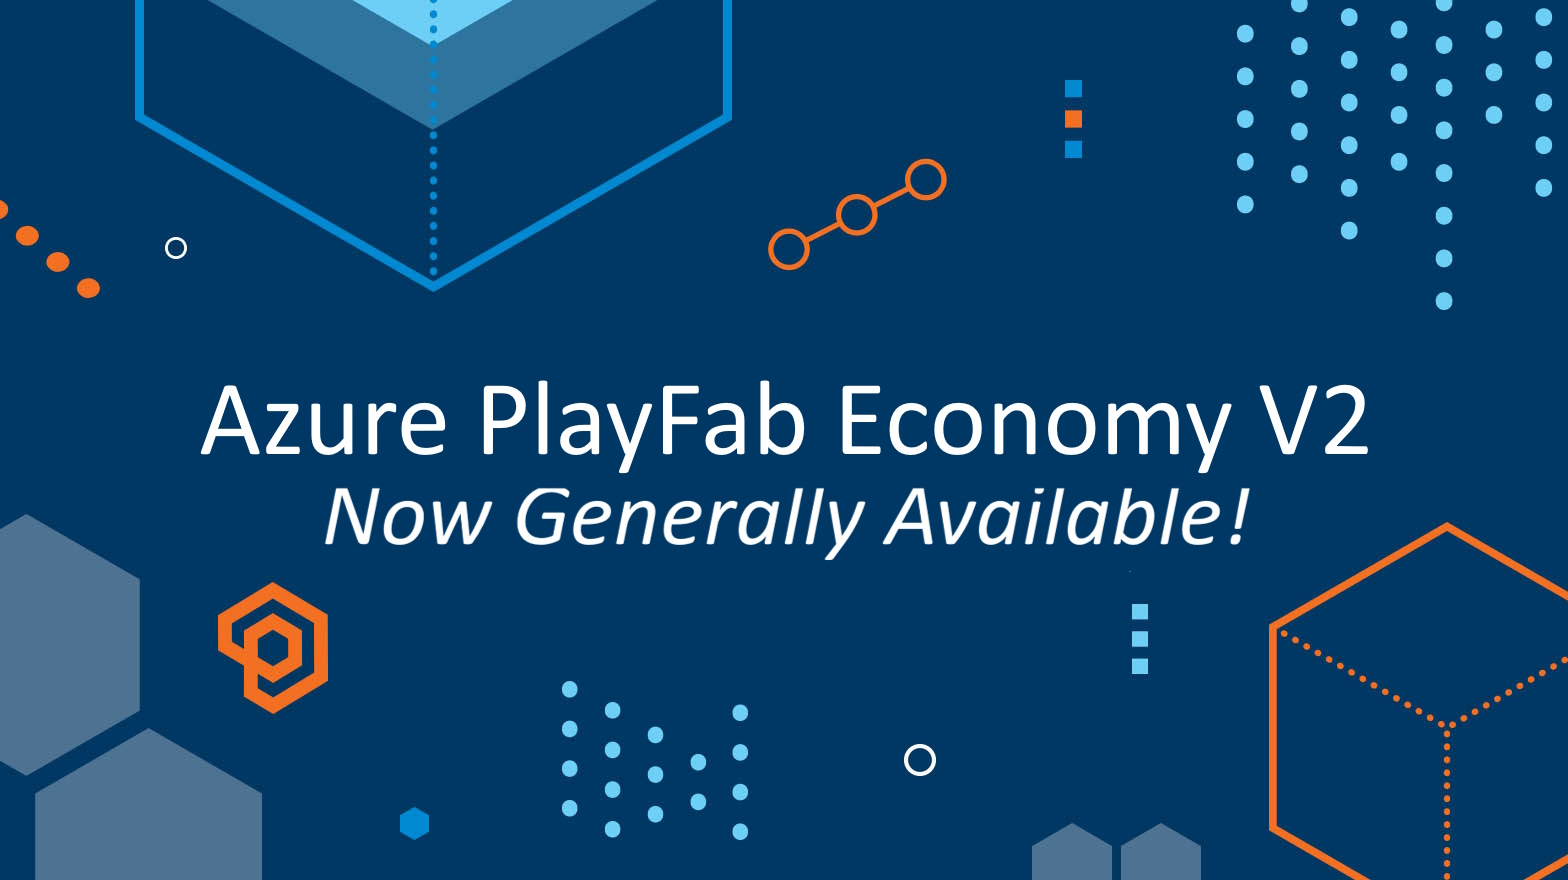 An image with the Azure PlayFab branding